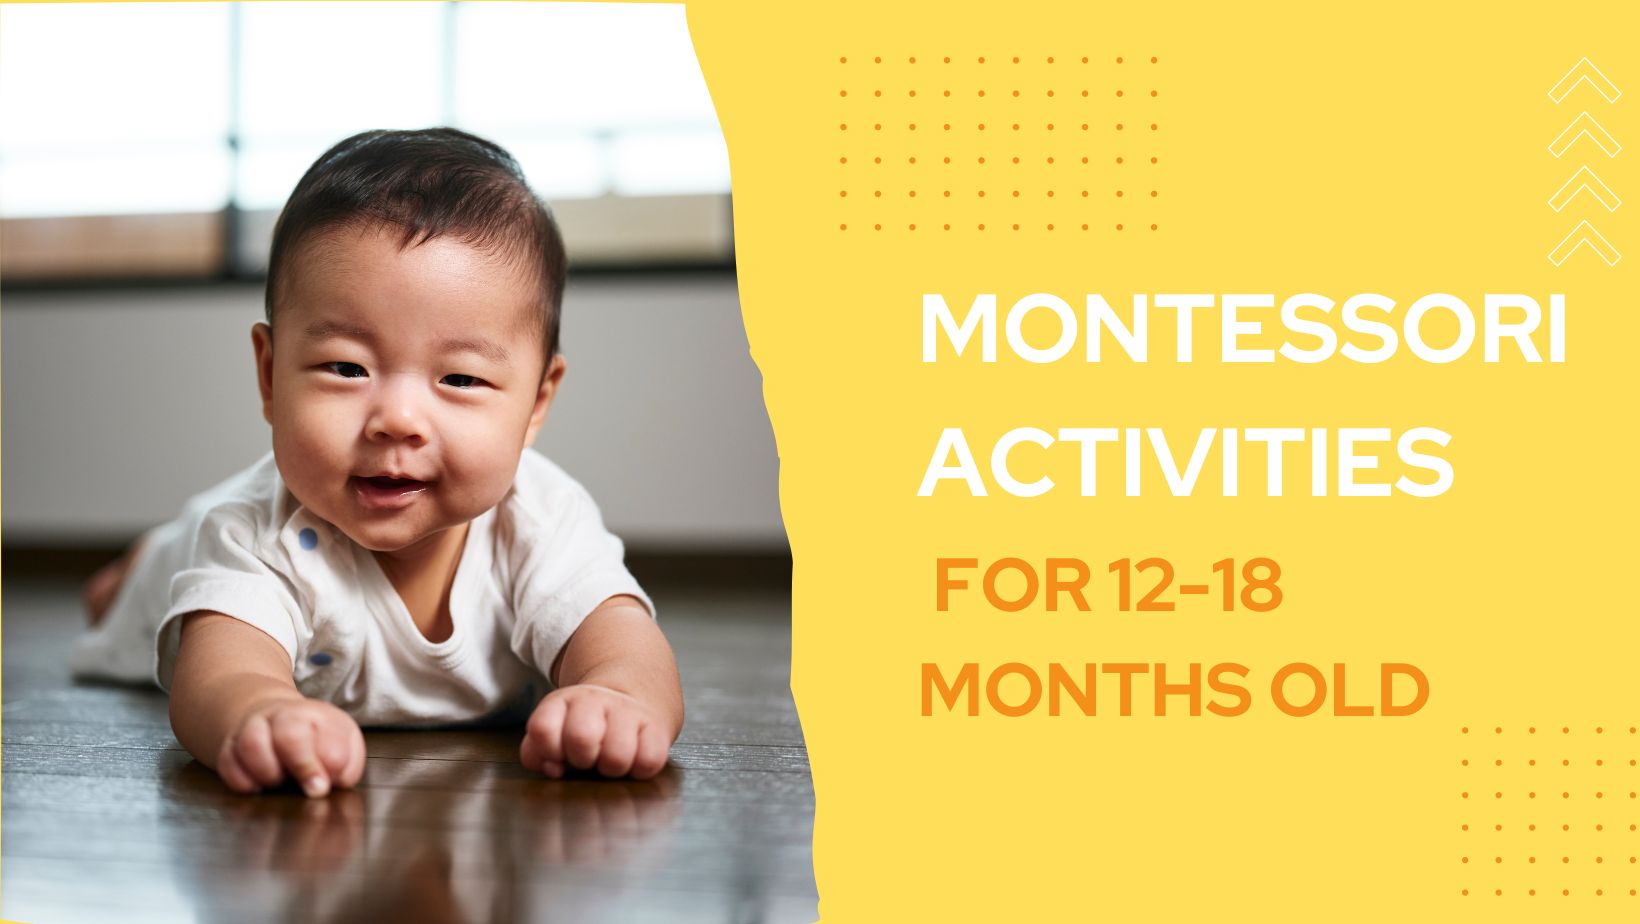 Montessori Activities for 12-18 Months Old